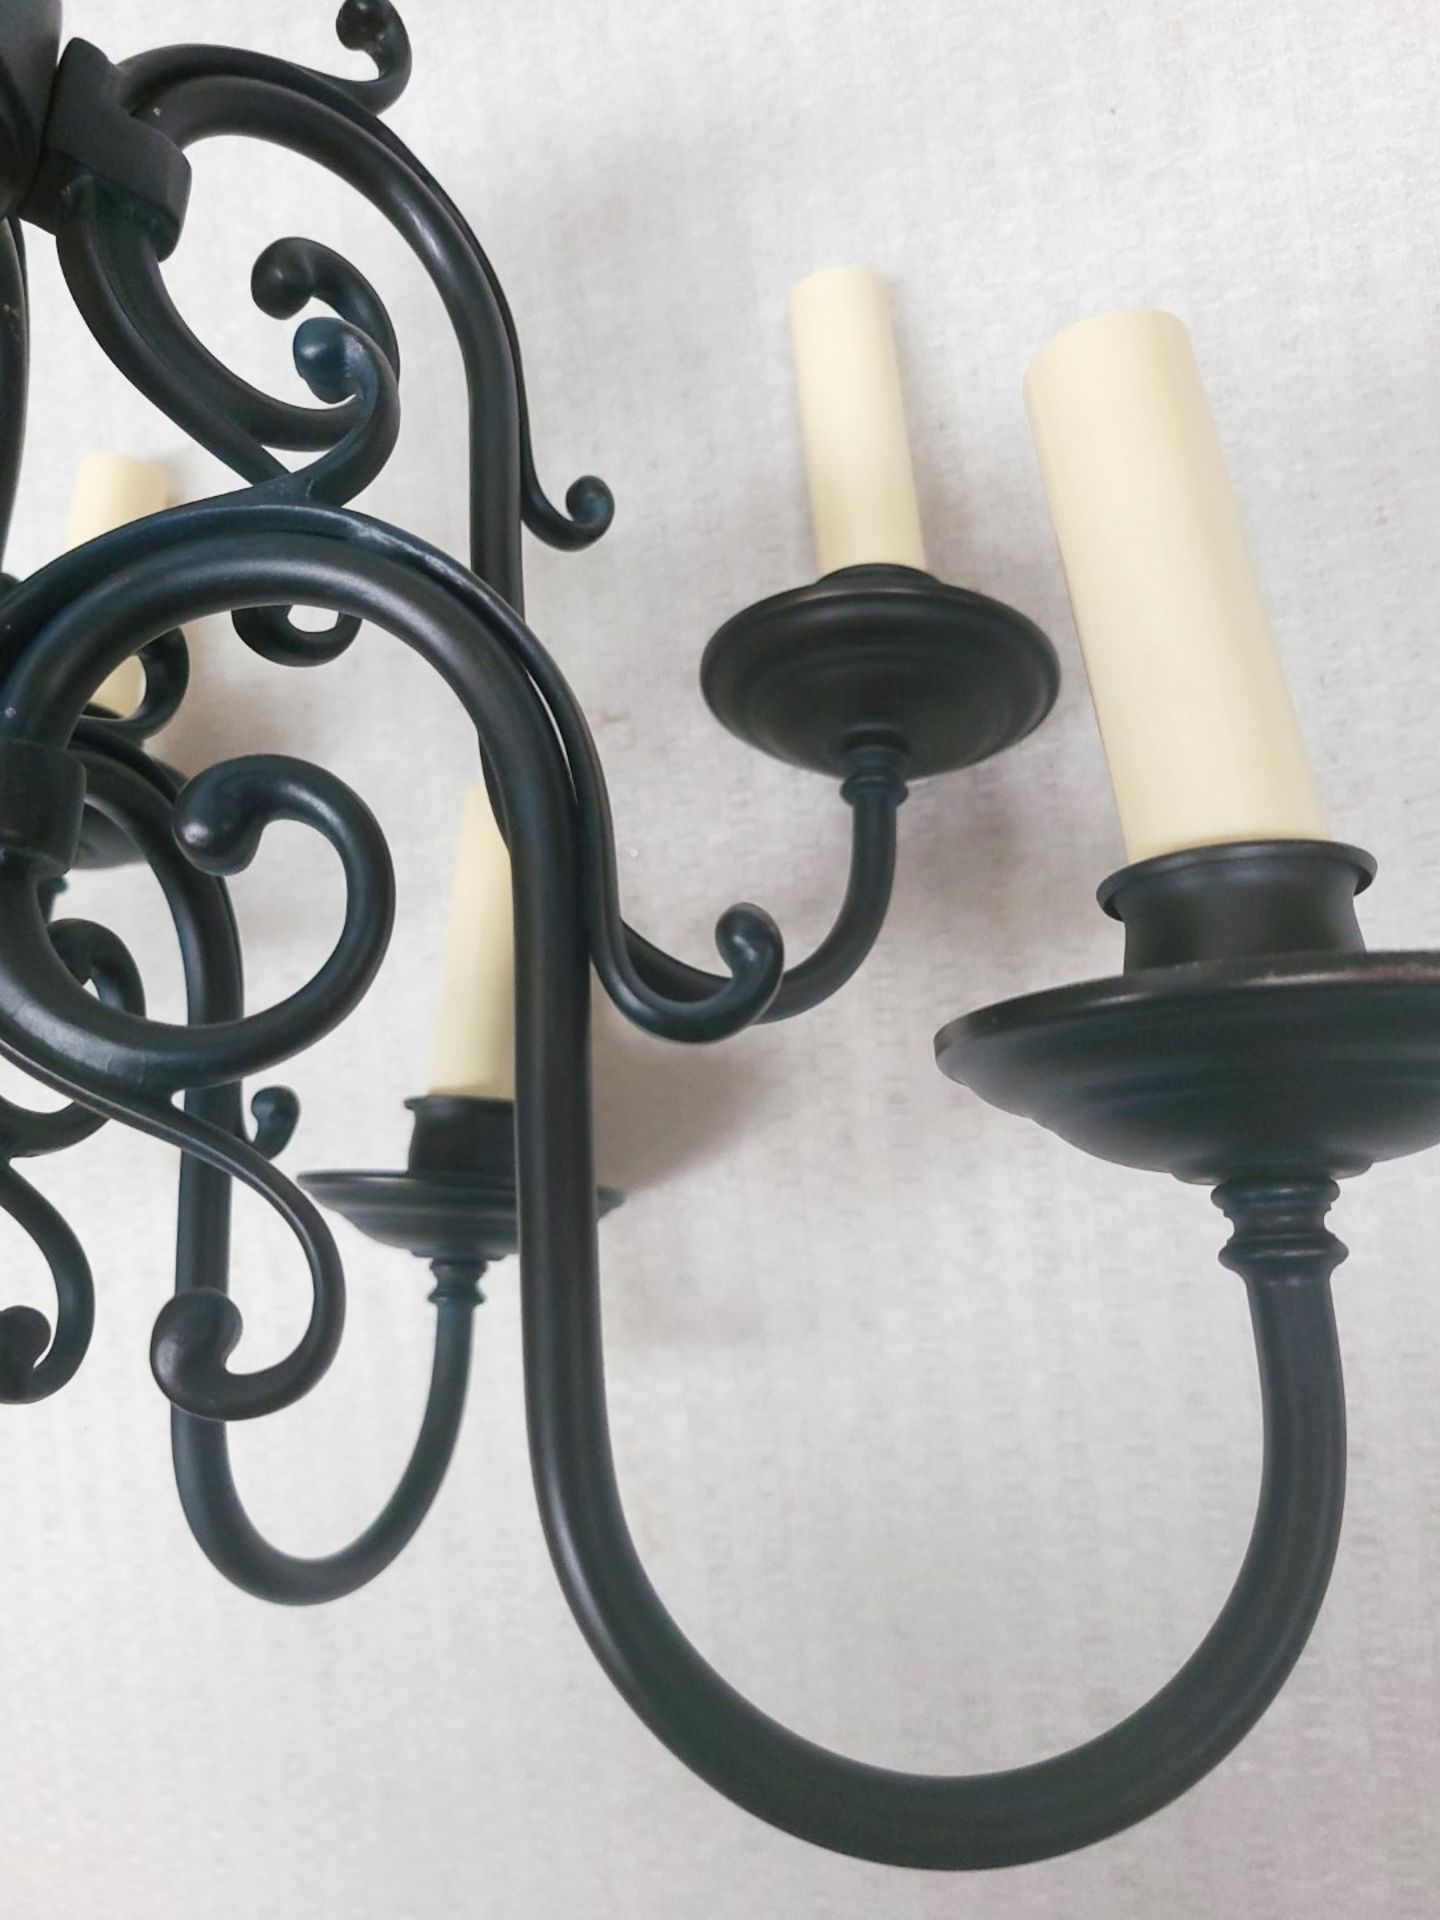 1 x CHELSOM Flemish Style 5 Light Dark Bronze Wall Sconce, With Outswept Curling Arms & Drip Pans - Image 2 of 11